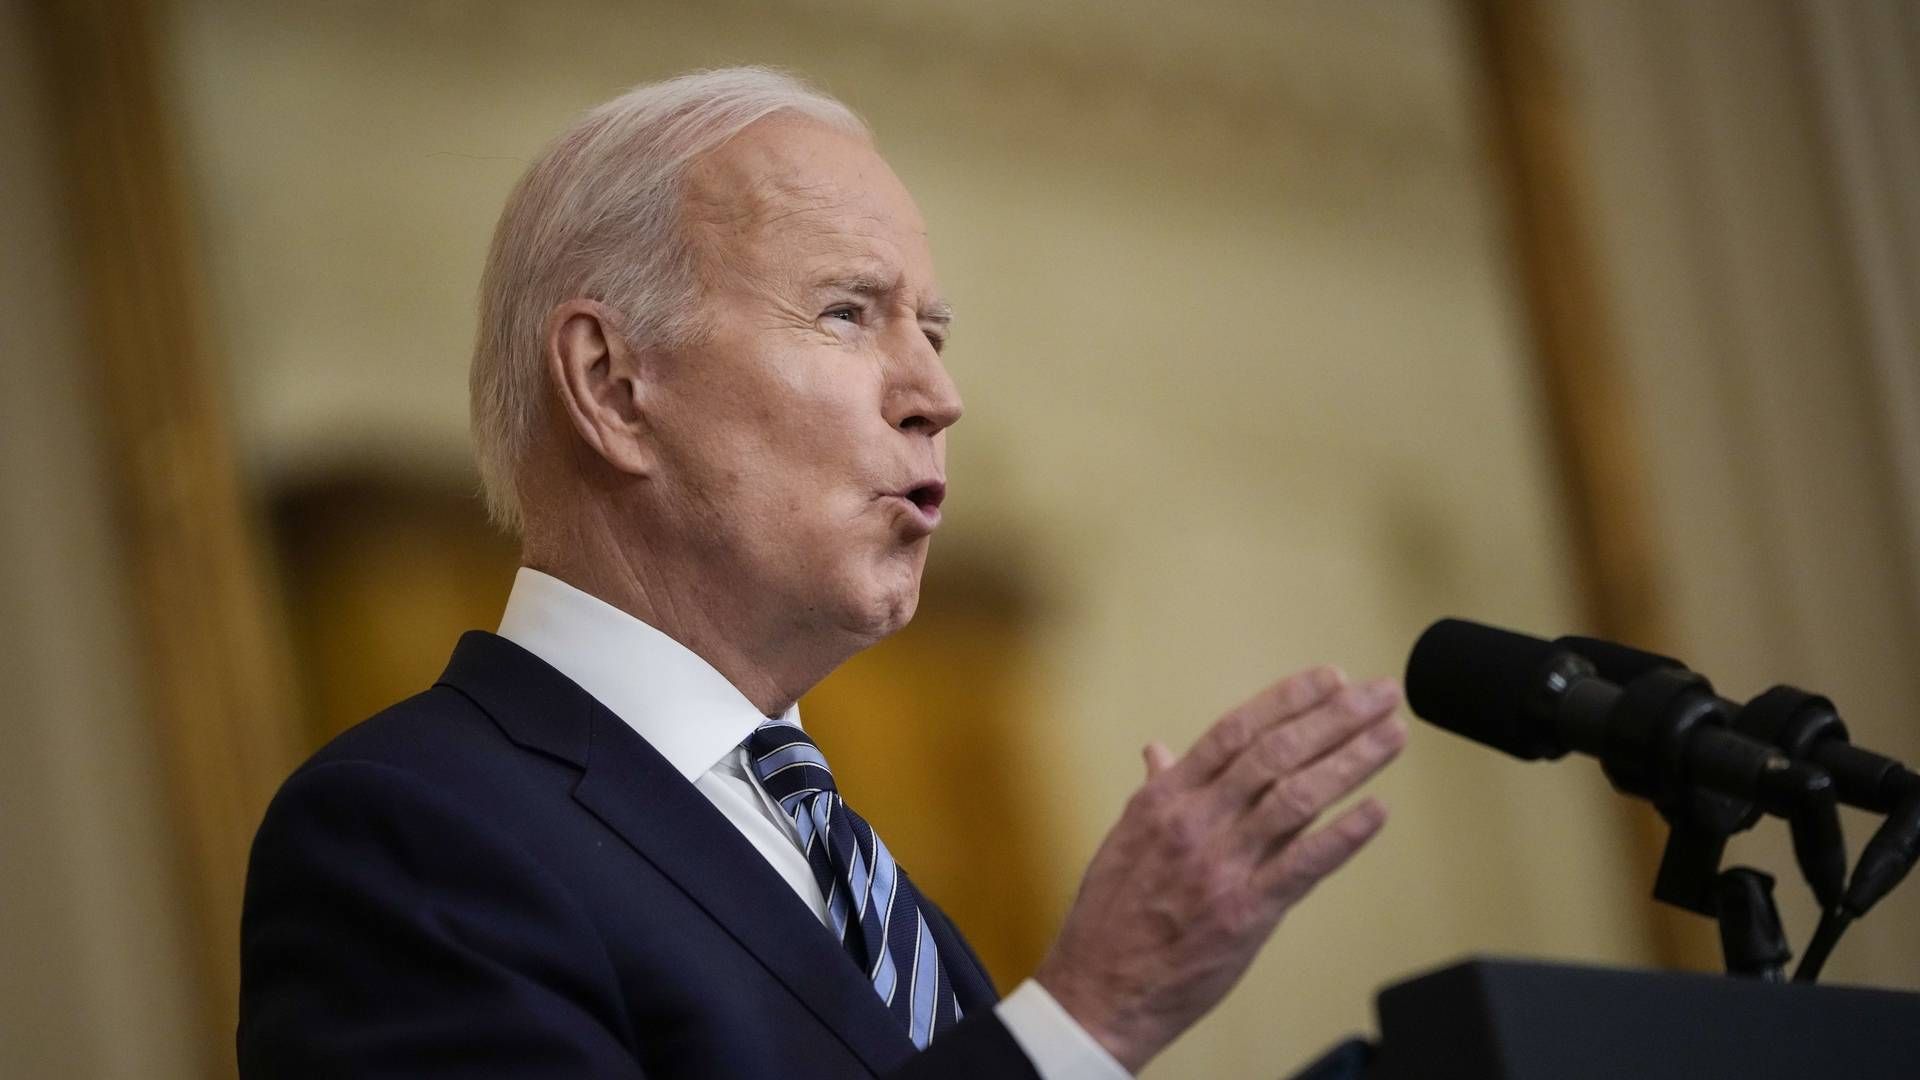 The President of the United States Joe Biden | Photo: DREW ANGERER/AFP / GETTY IMAGES NORTH AMERICA